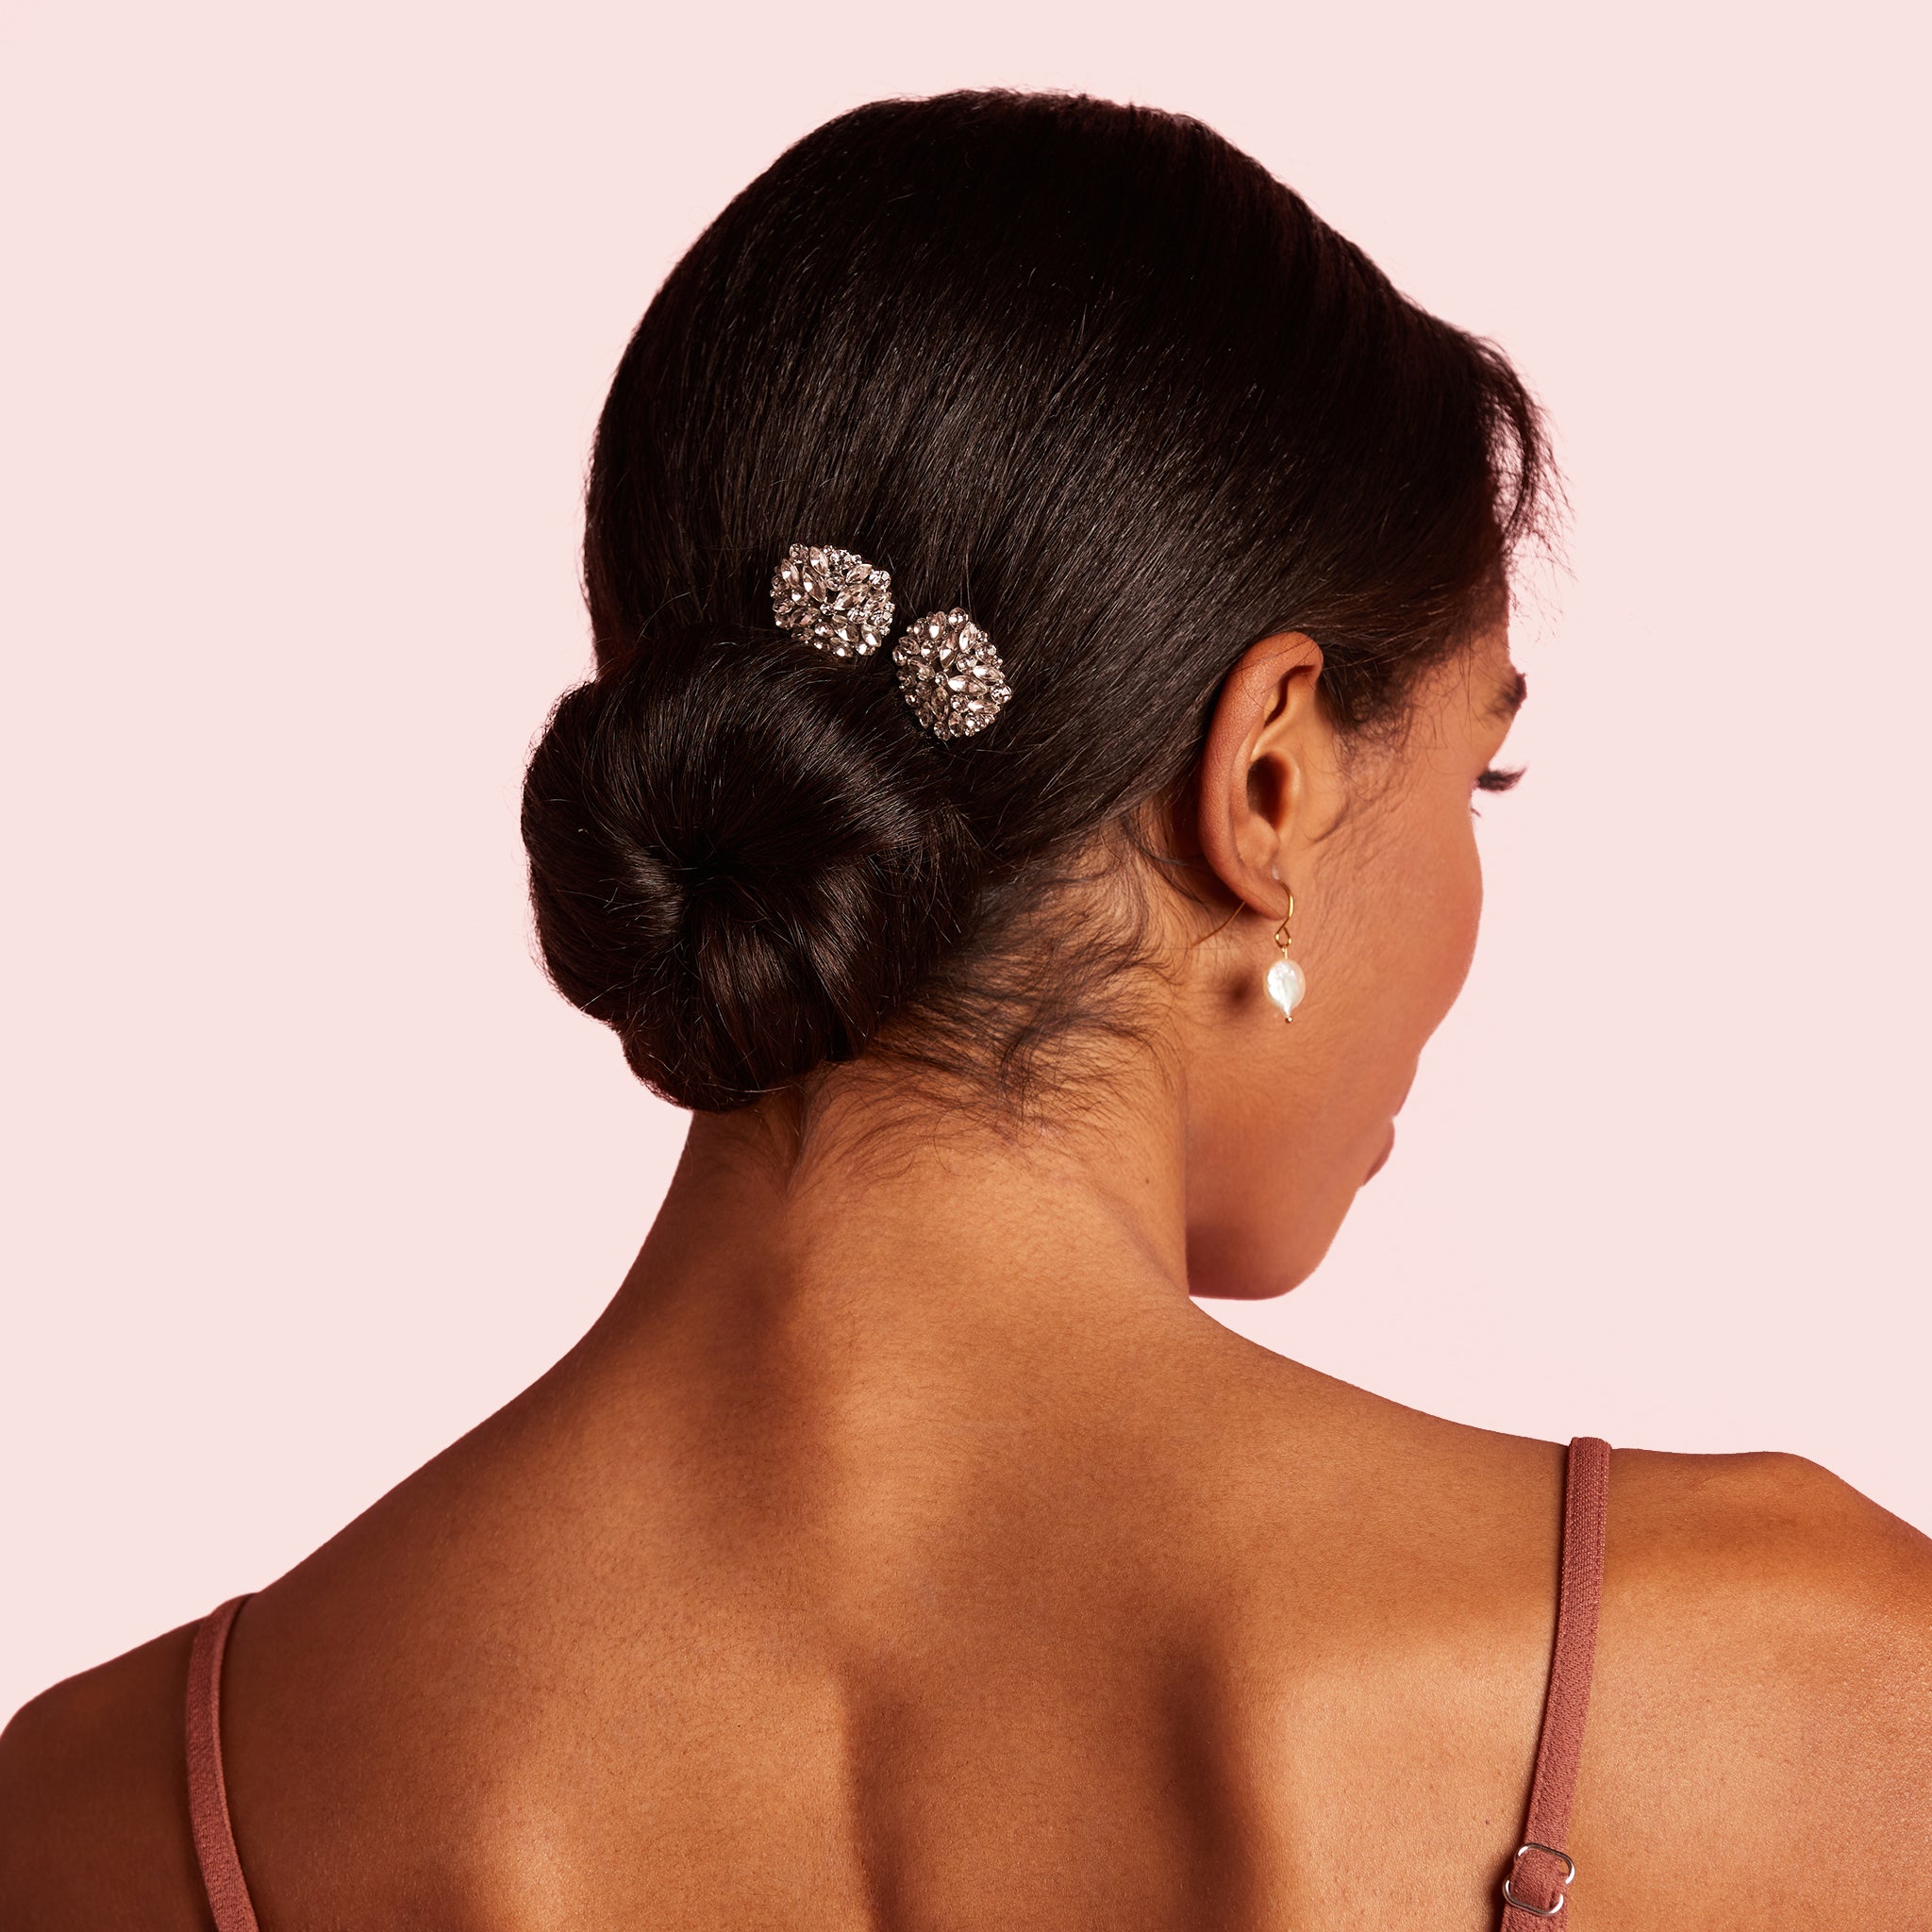 Capri Floating Crystal Hair Pins by Birdy Grey, front view